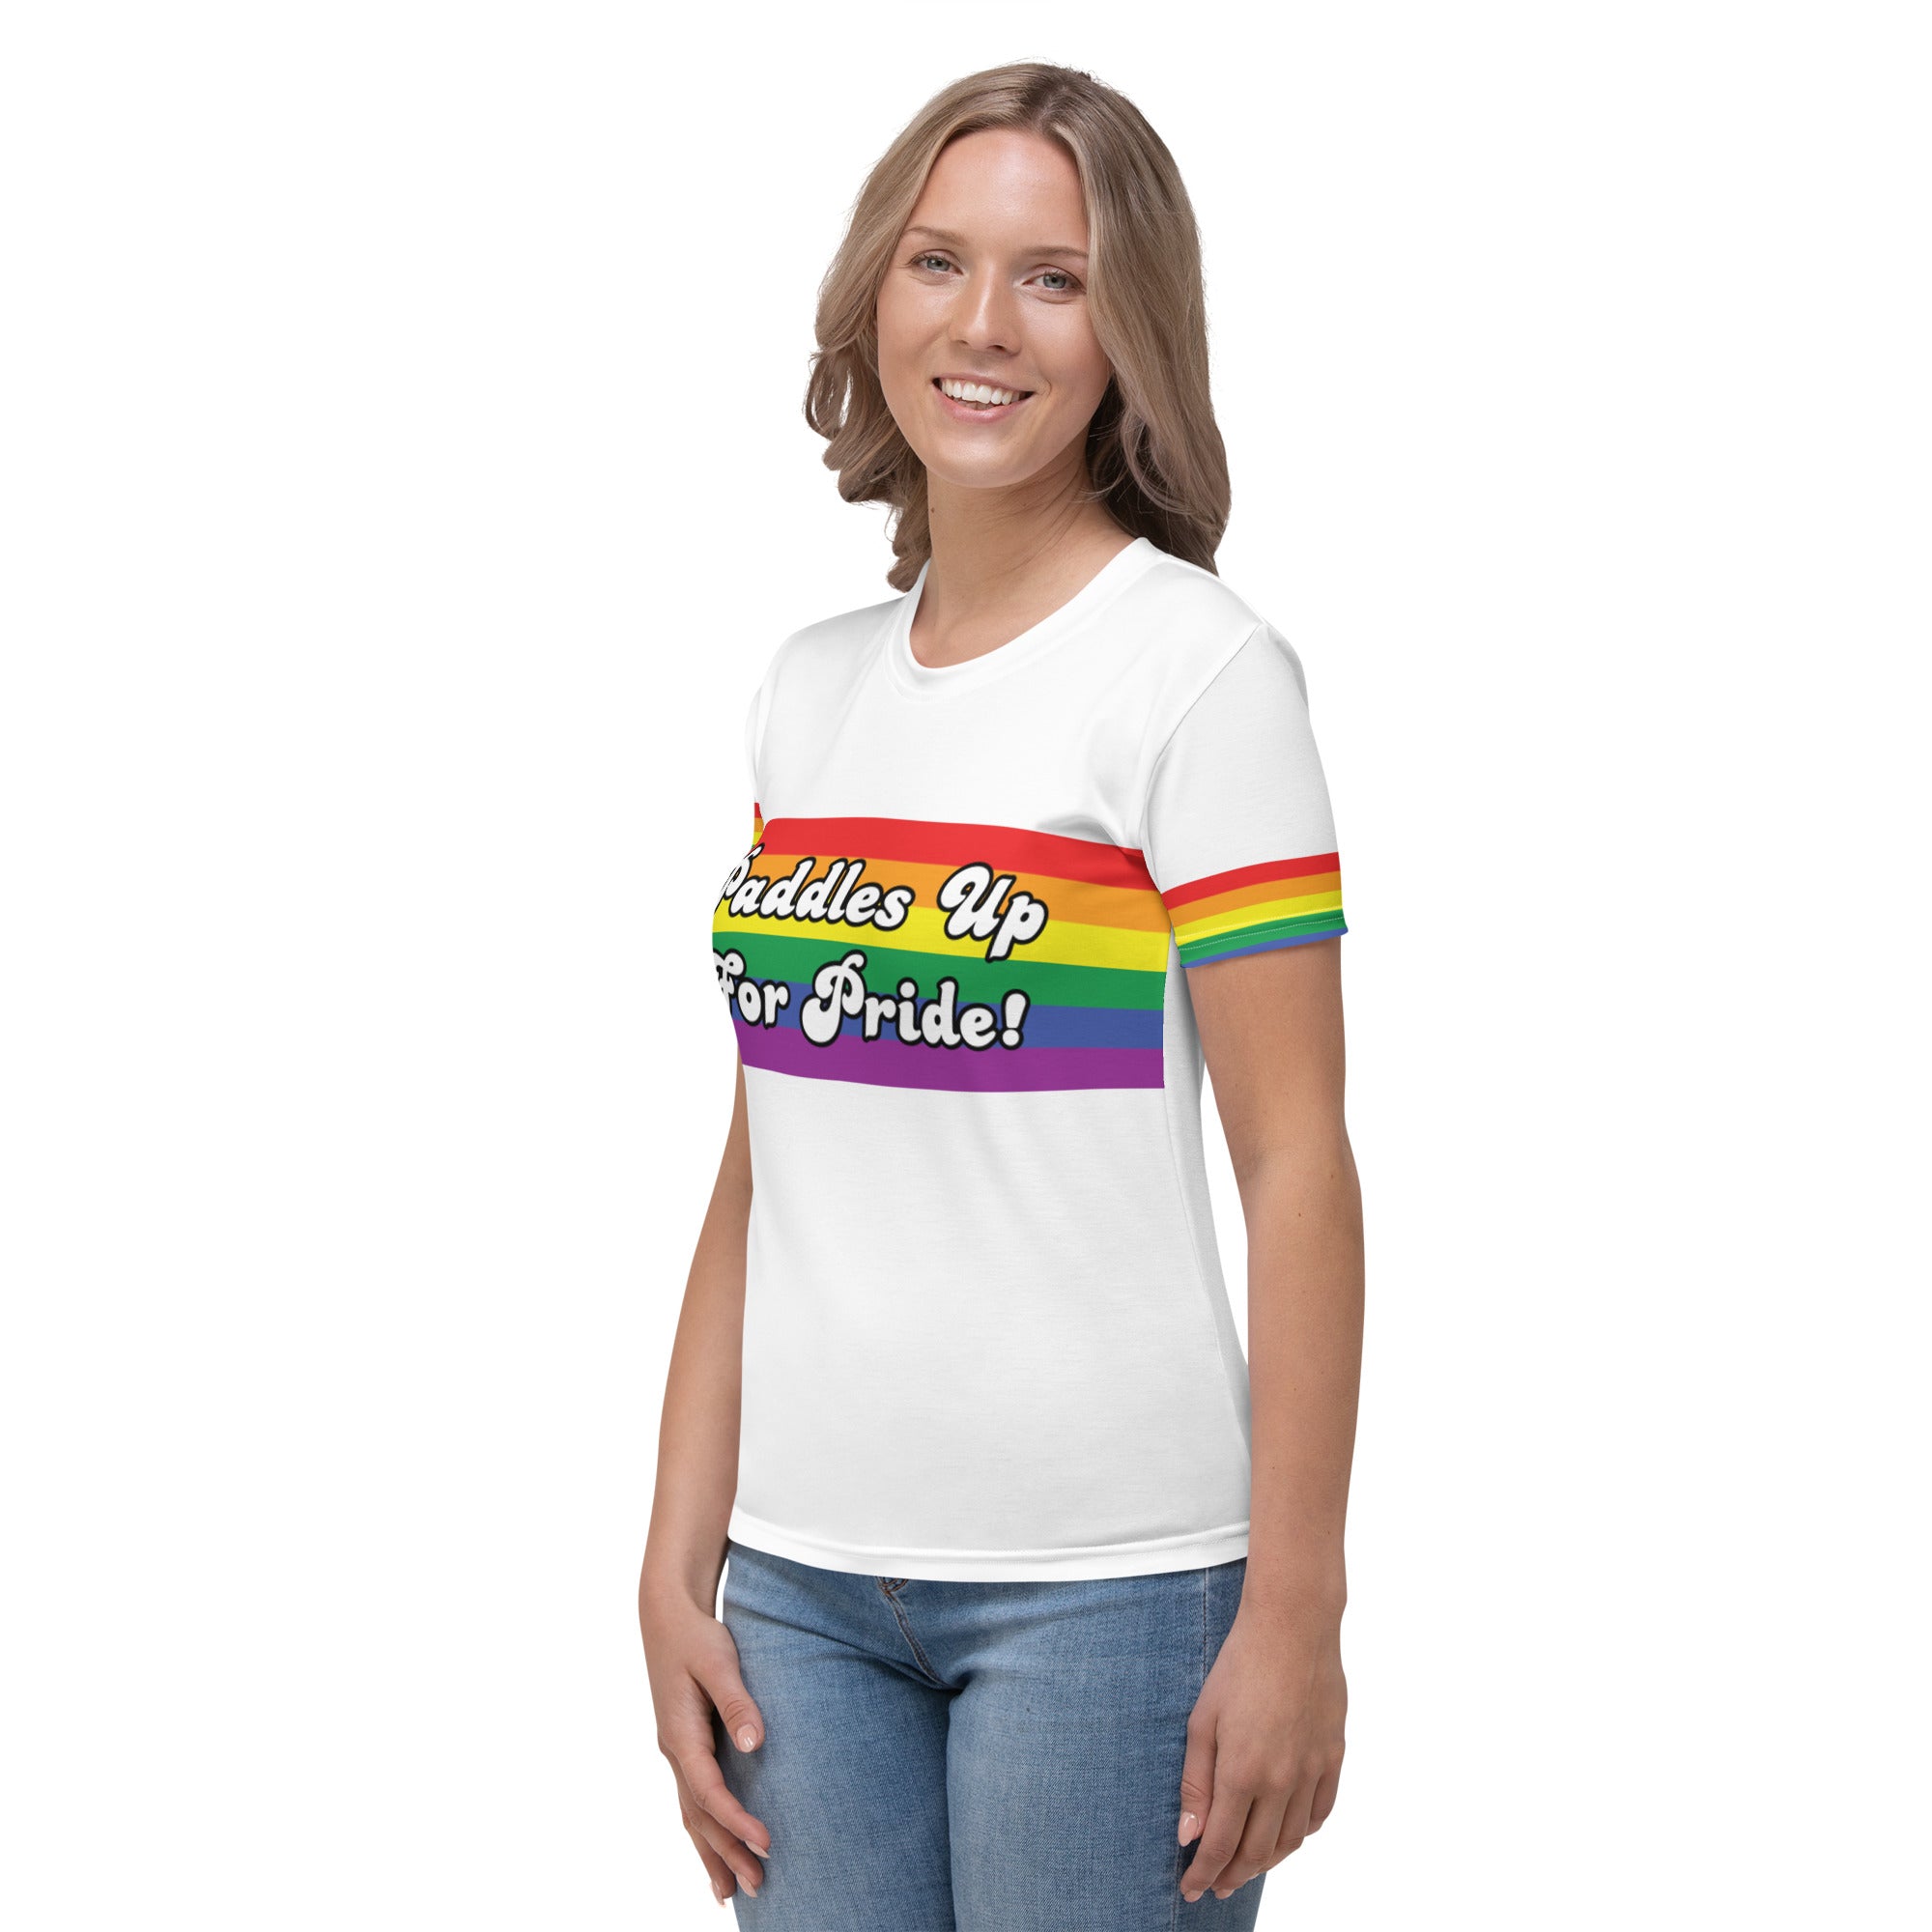 Women's T-shirt - Paddles Up For Pride!